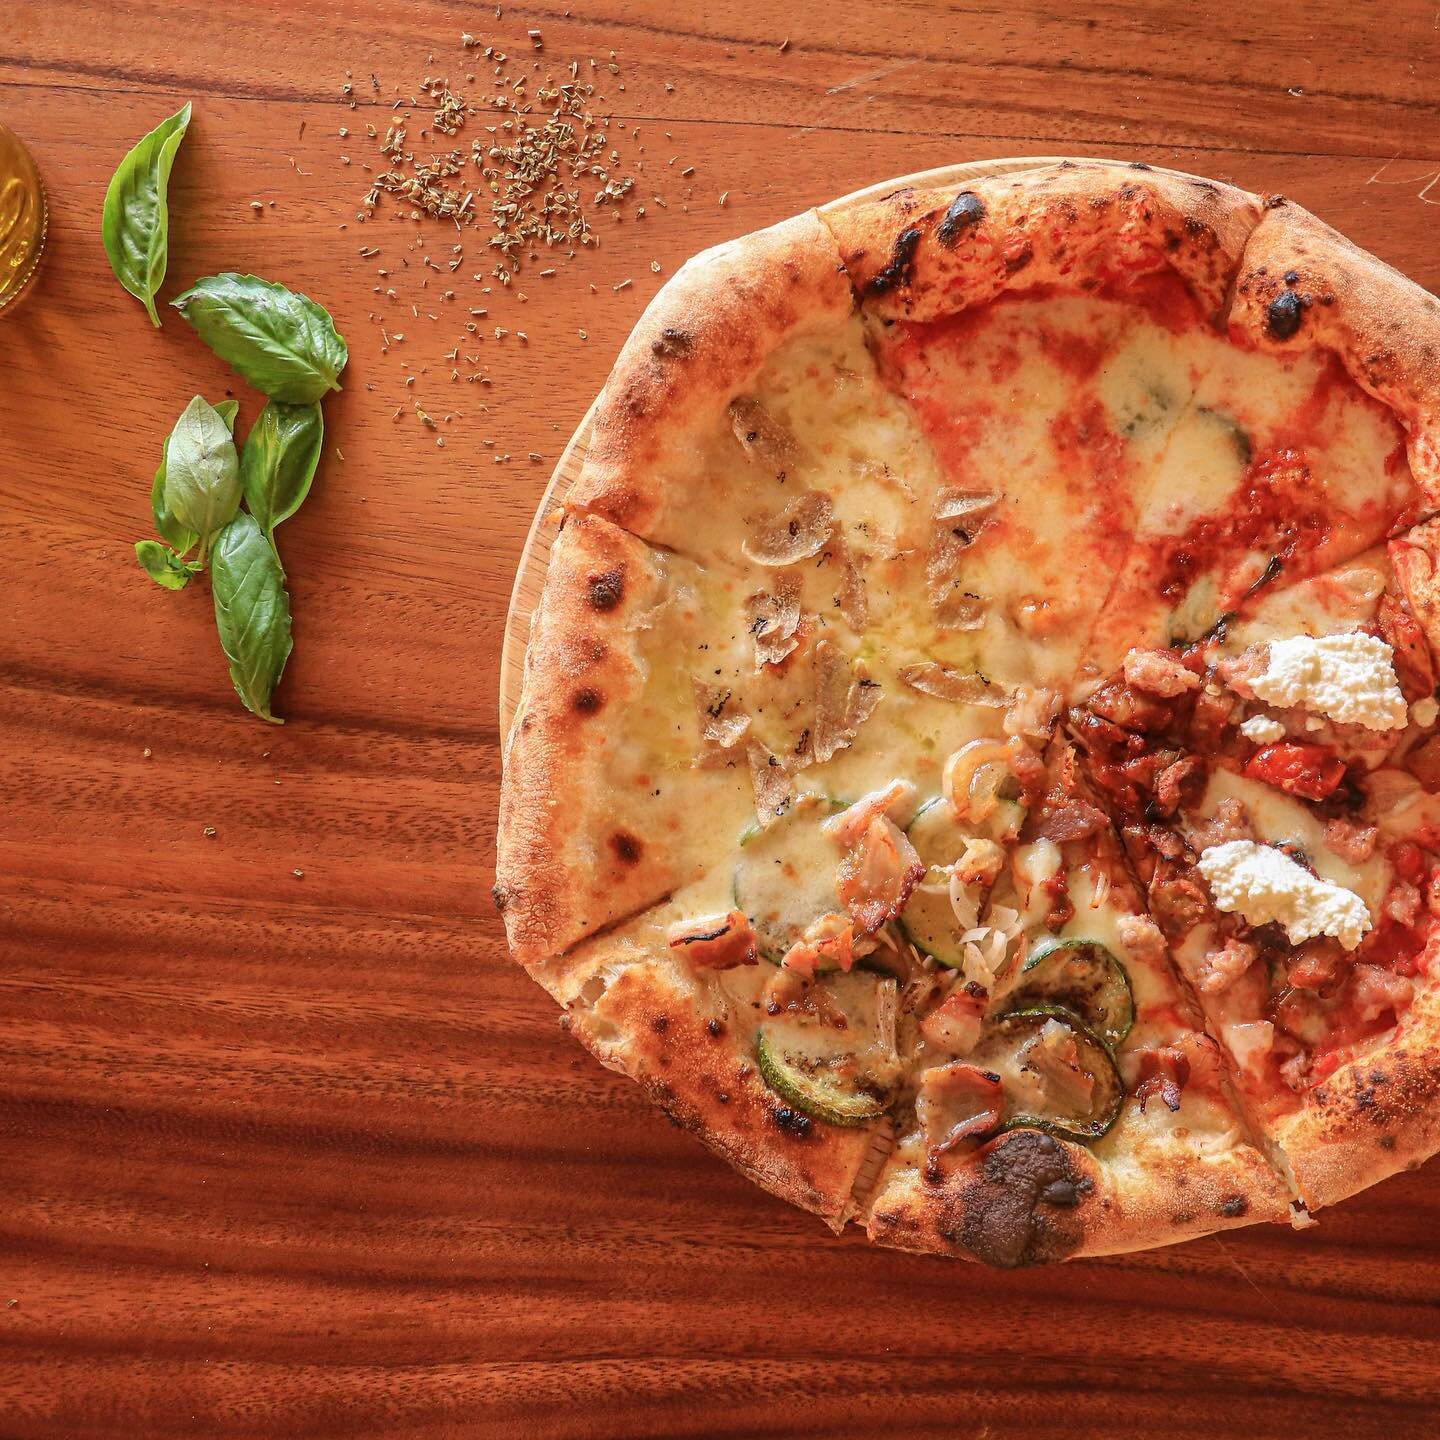 POTM: Pizza Quattro Regioni

Pizza quattro regioni, meaning &ldquo;four region pizza&rdquo;, features four different toppings on one pizza, with each of the four quadrants representing ingredients from different regions of Italy:

🔸 Margherita; from